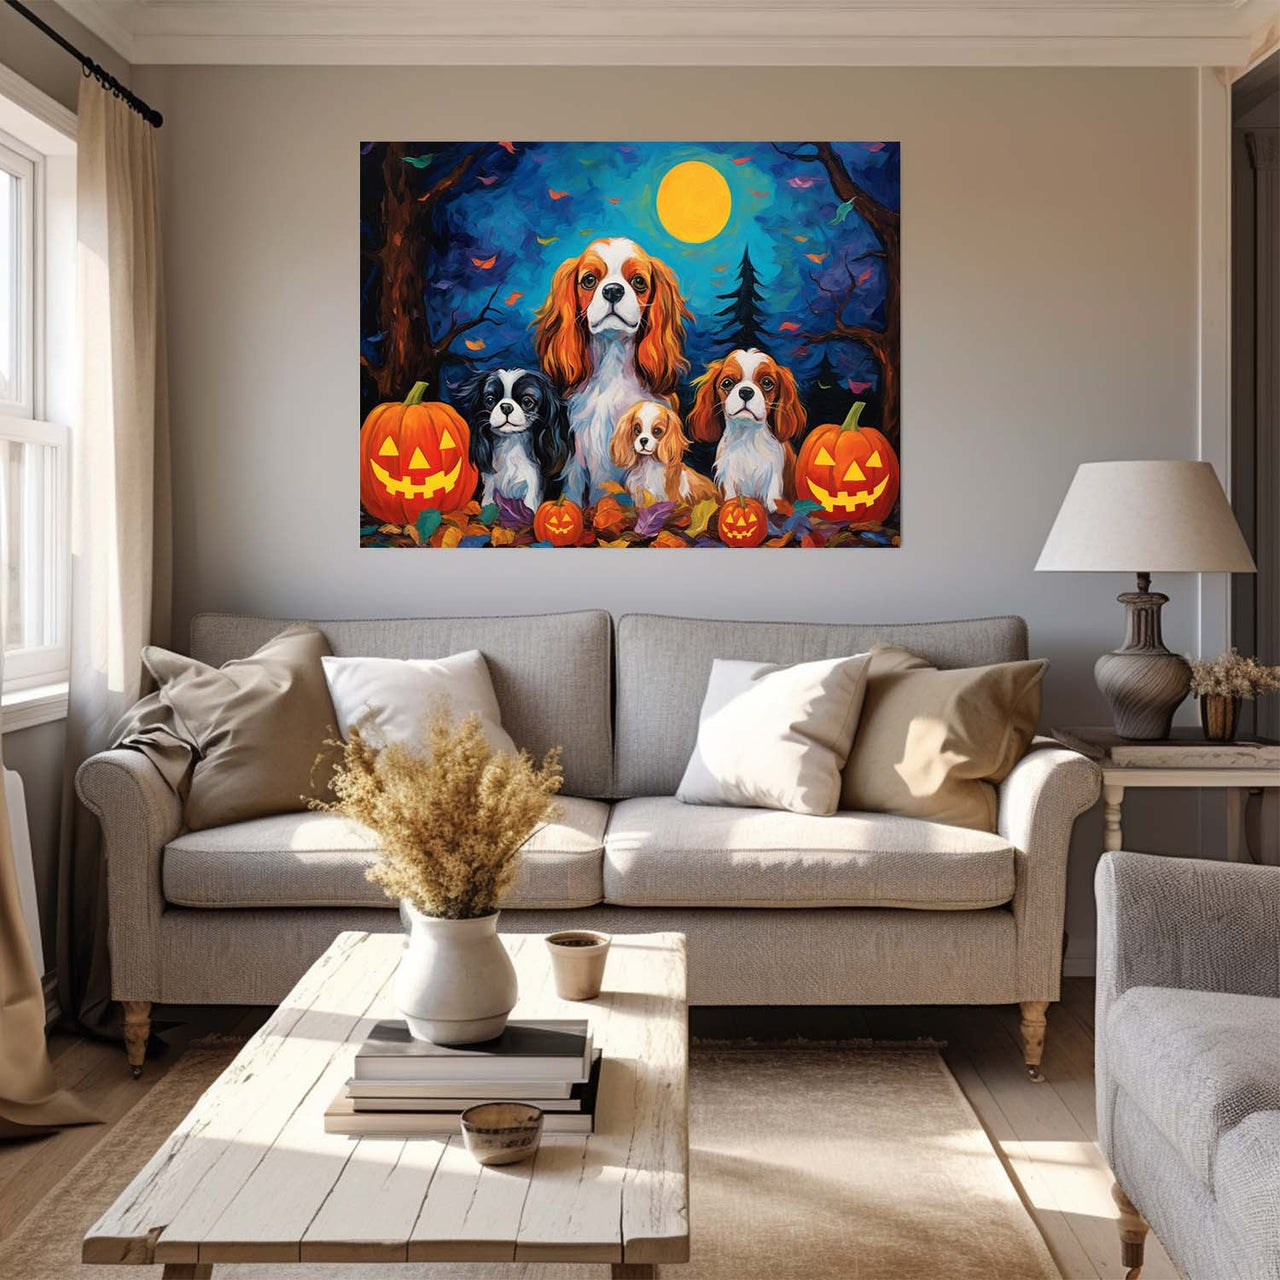 Cavalier King Charles Spaniels Dog 02 Halloween With Pumpkin Oil Painting Van Goh Style, Wooden Canvas Prints Wall Art Painting , Canvas 3d Art